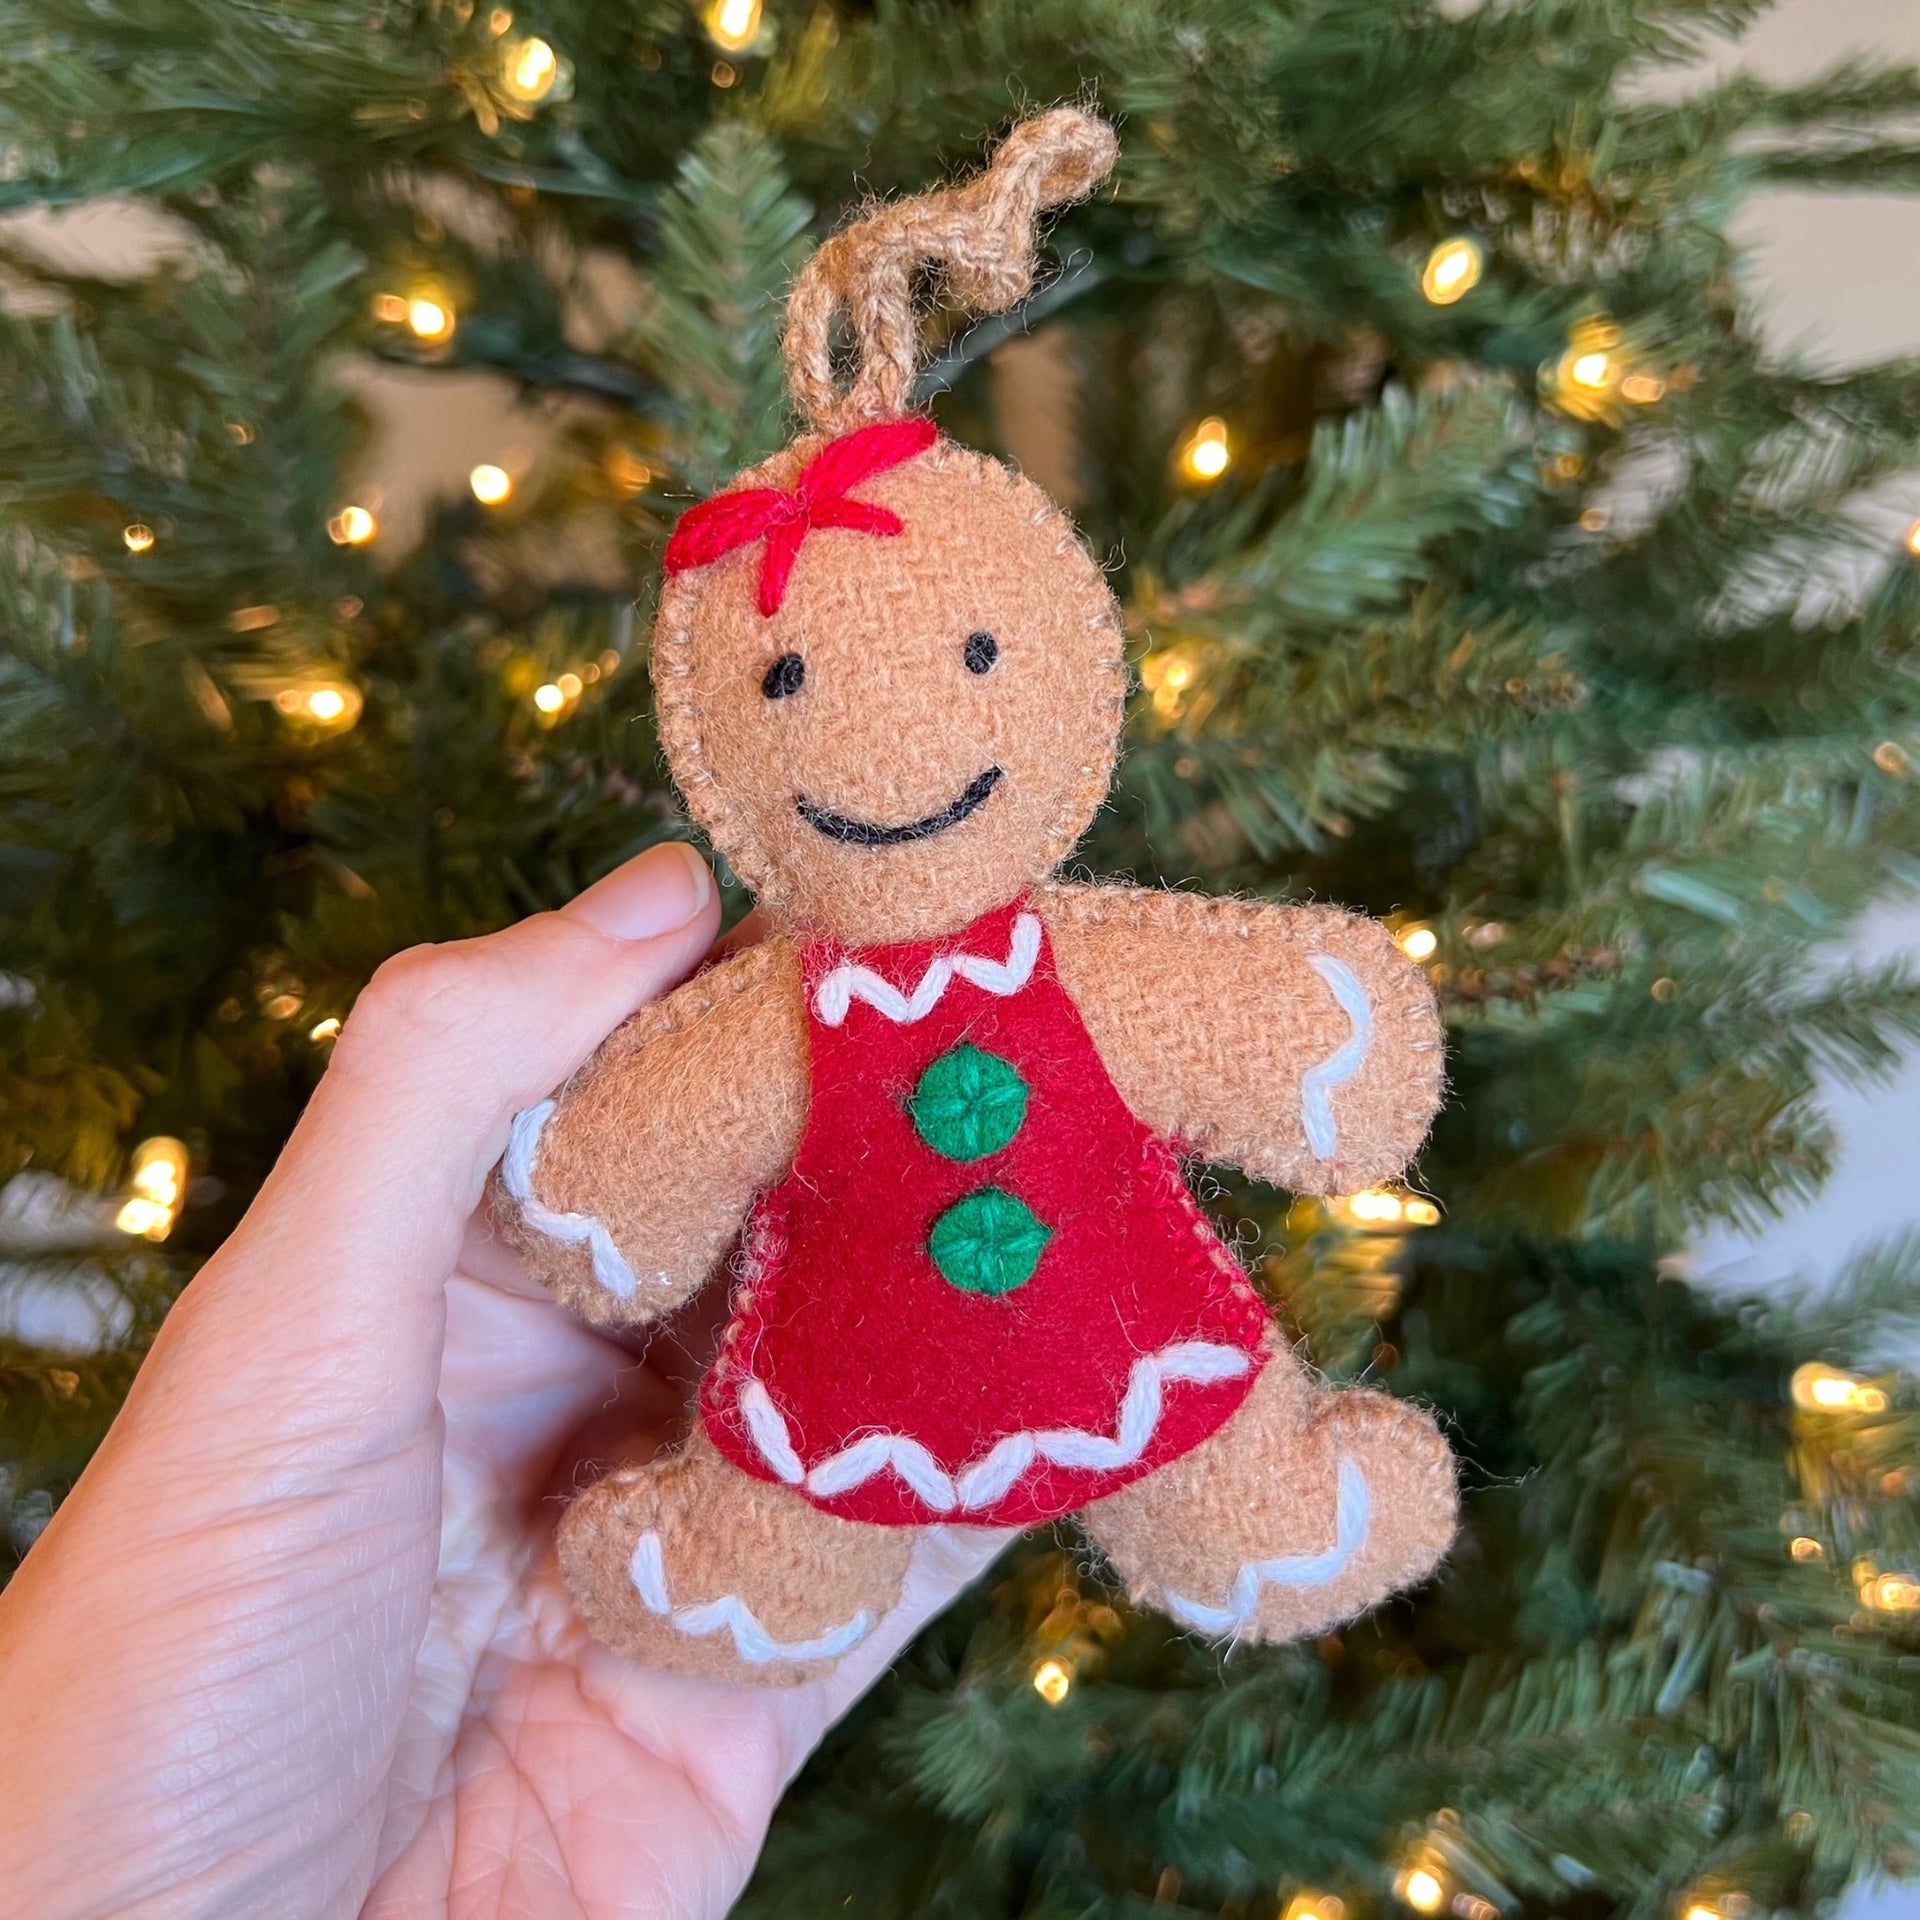 Holding a plush handmade Gingerbread Woman Ornament in from of Christmas Tree